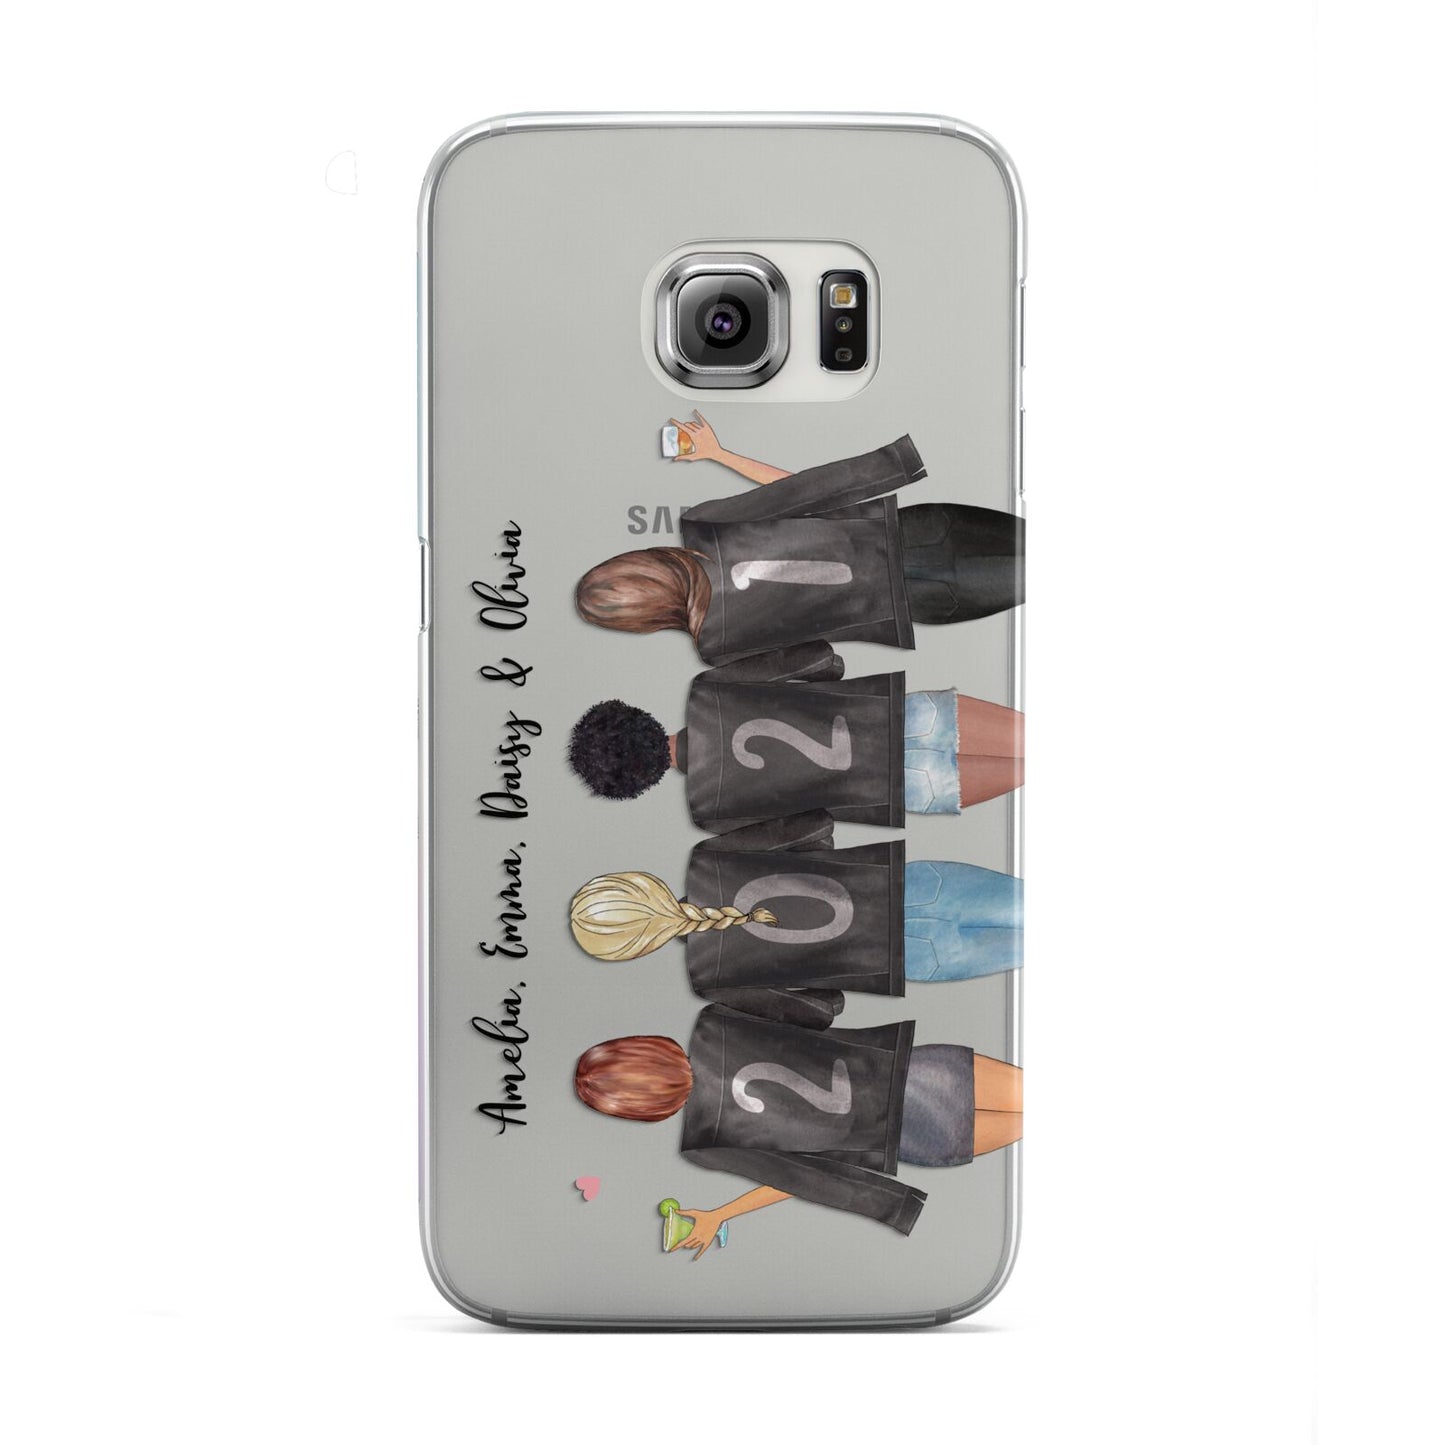 4 Best Friends with Names Samsung Galaxy S6 Edge Case